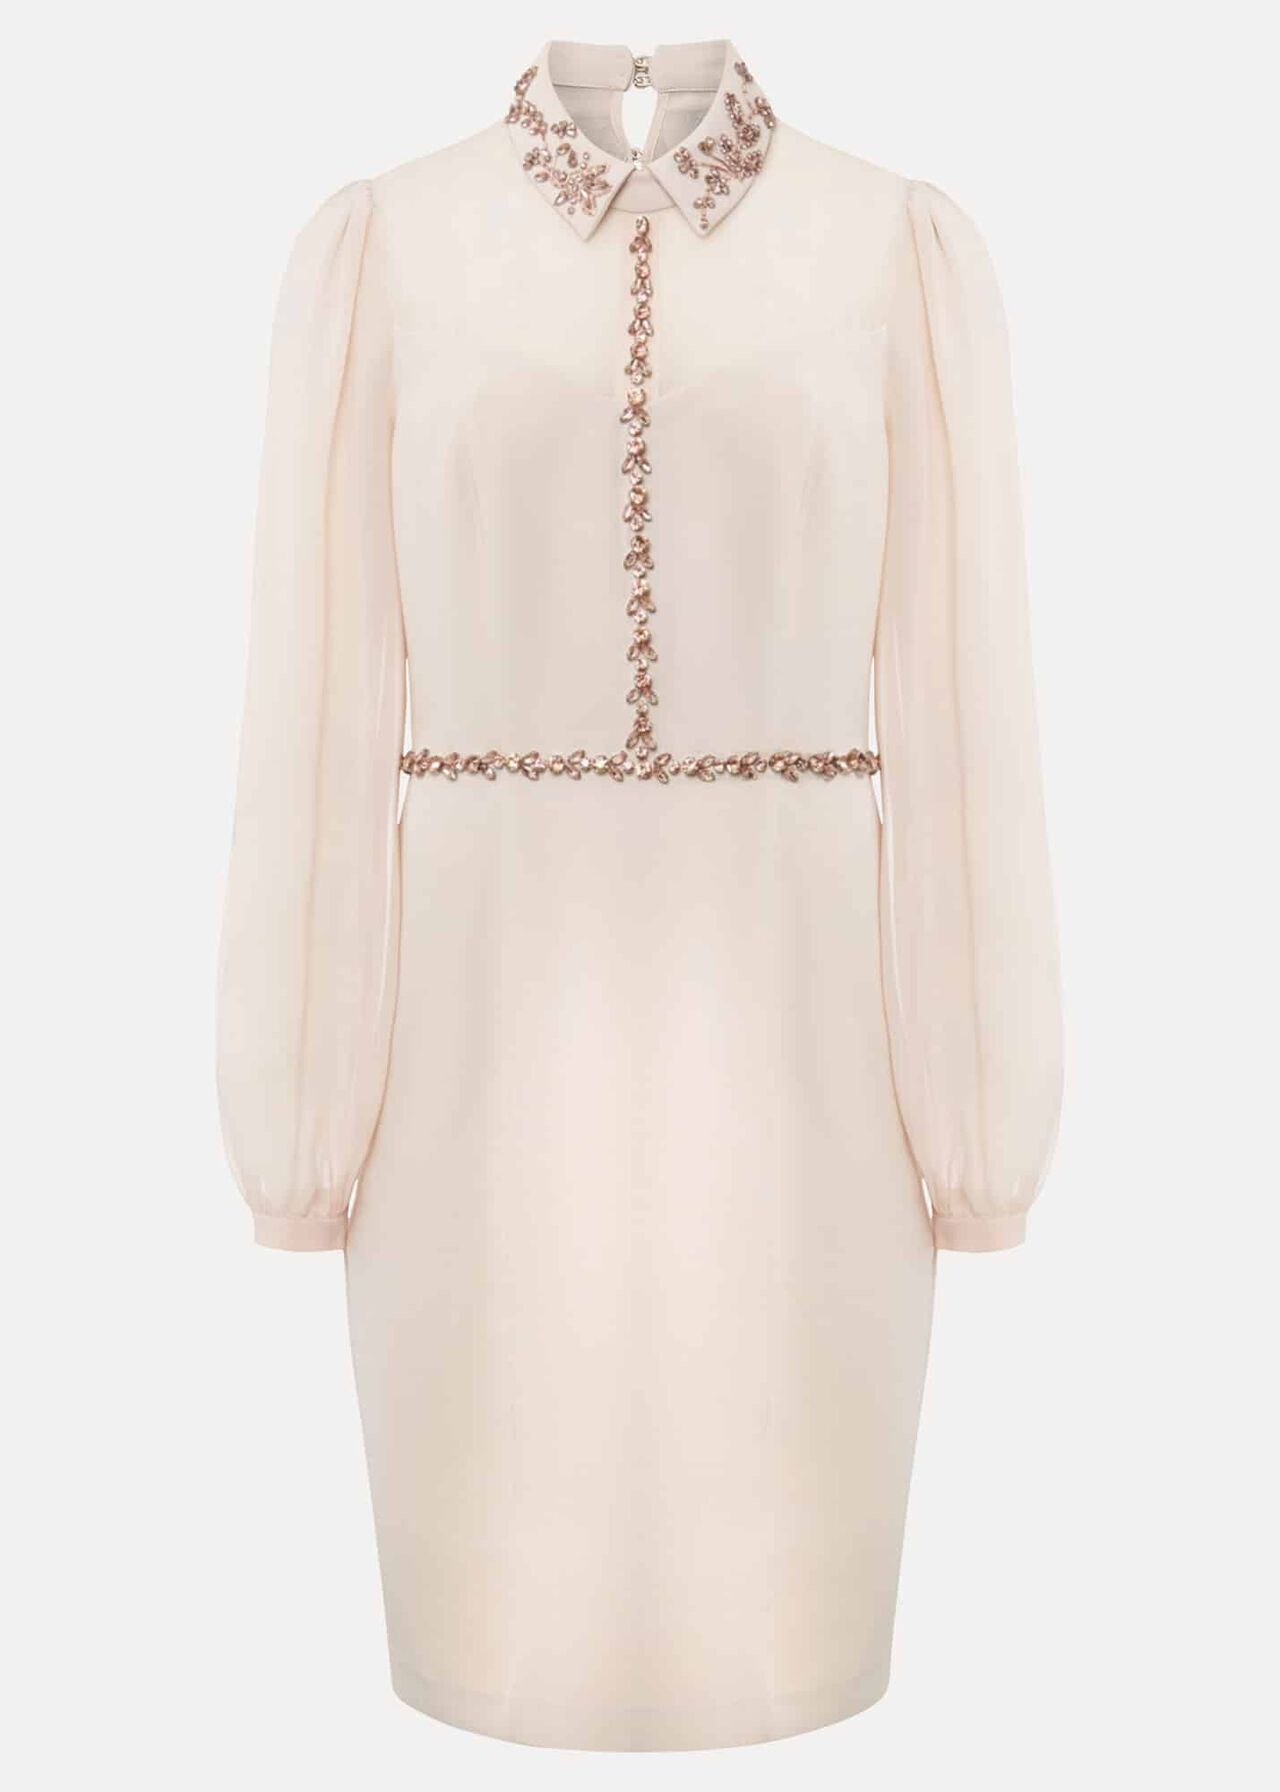 Avah Embellished Fitted Dress